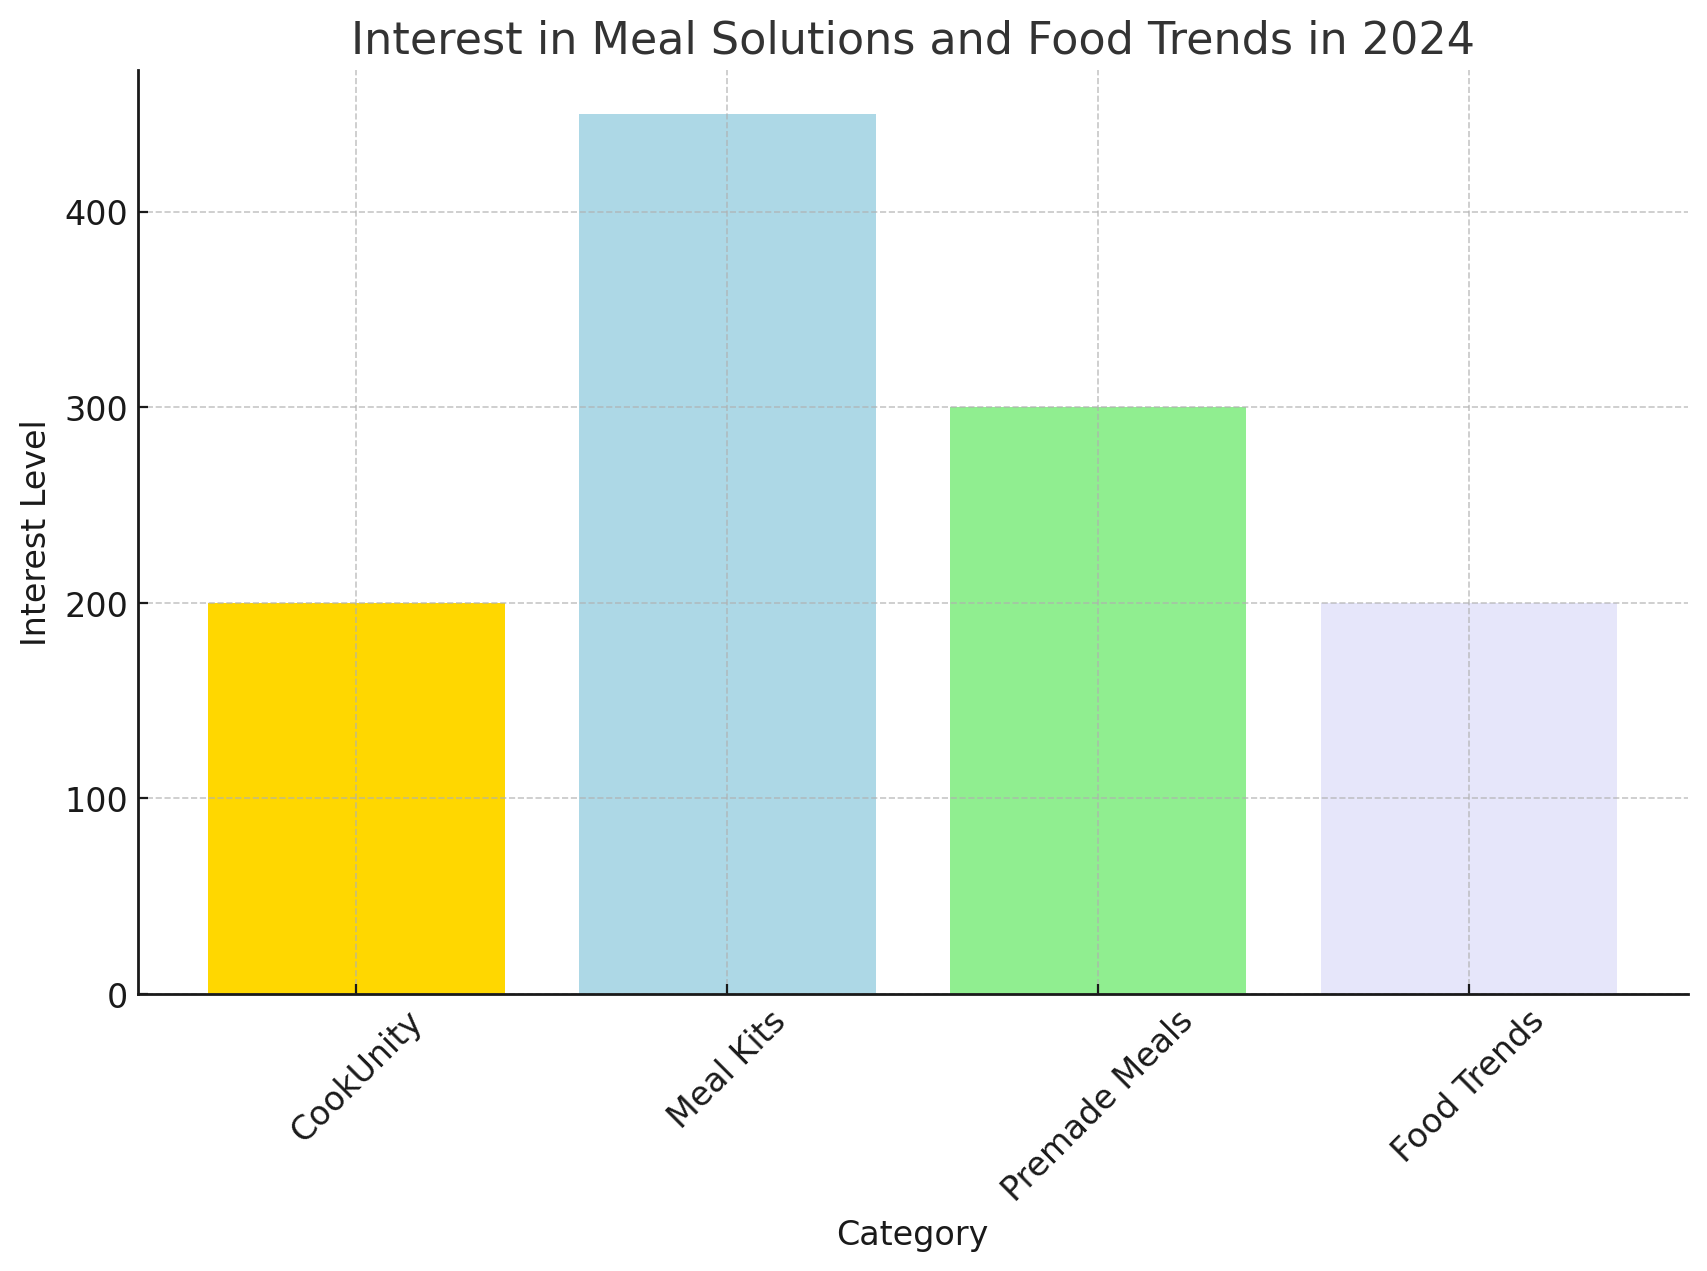 Interest in Meal Solutions and Food Trends in 2024